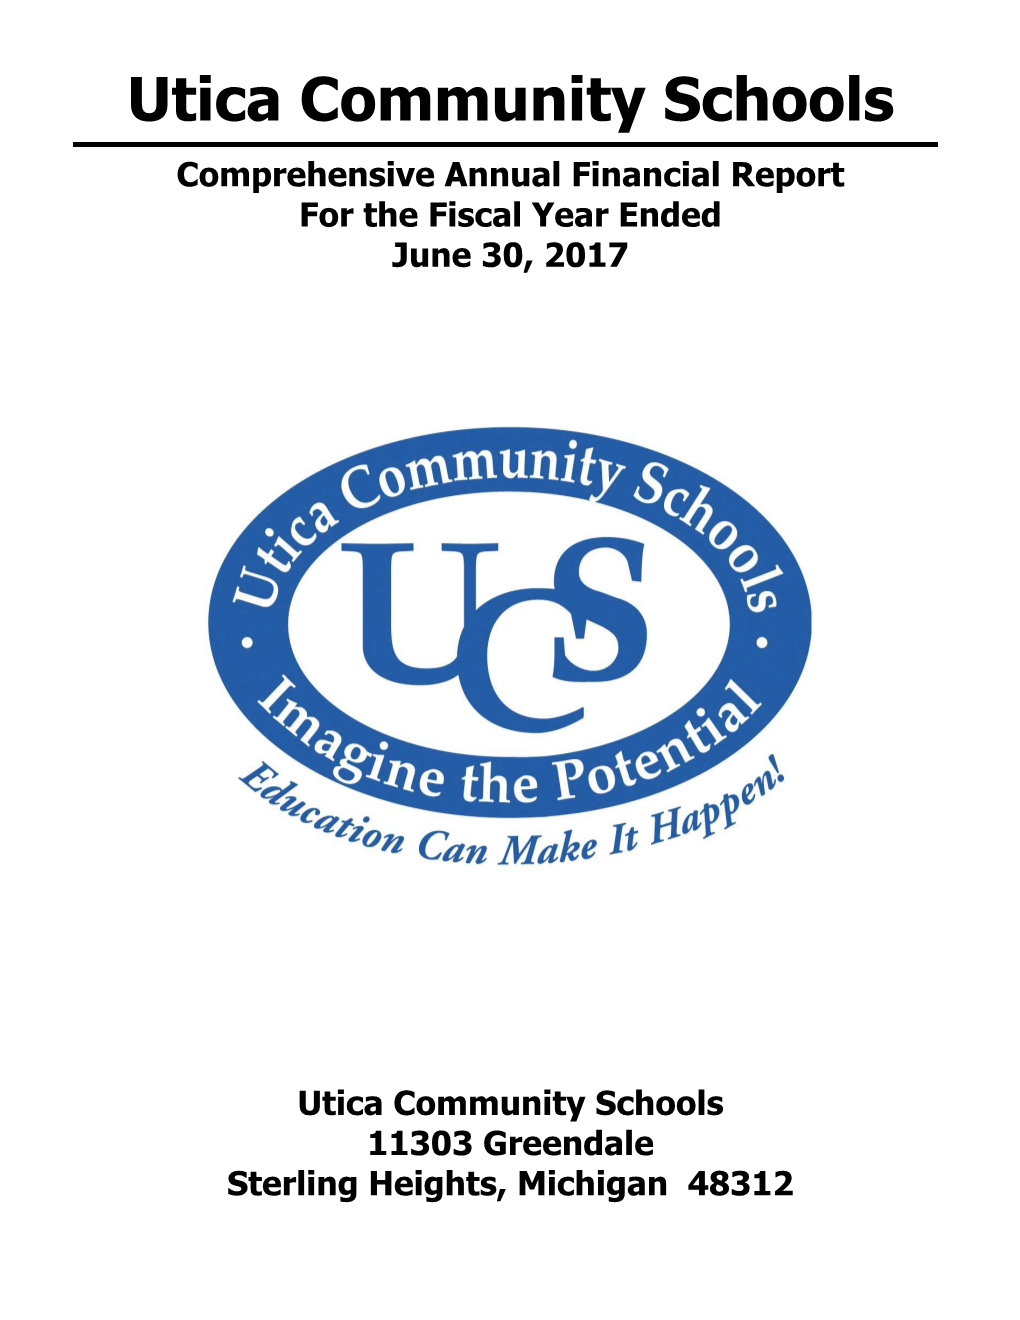 Comprehensive Annual Financial Report for the Fiscal Year Ended June 30, 2017